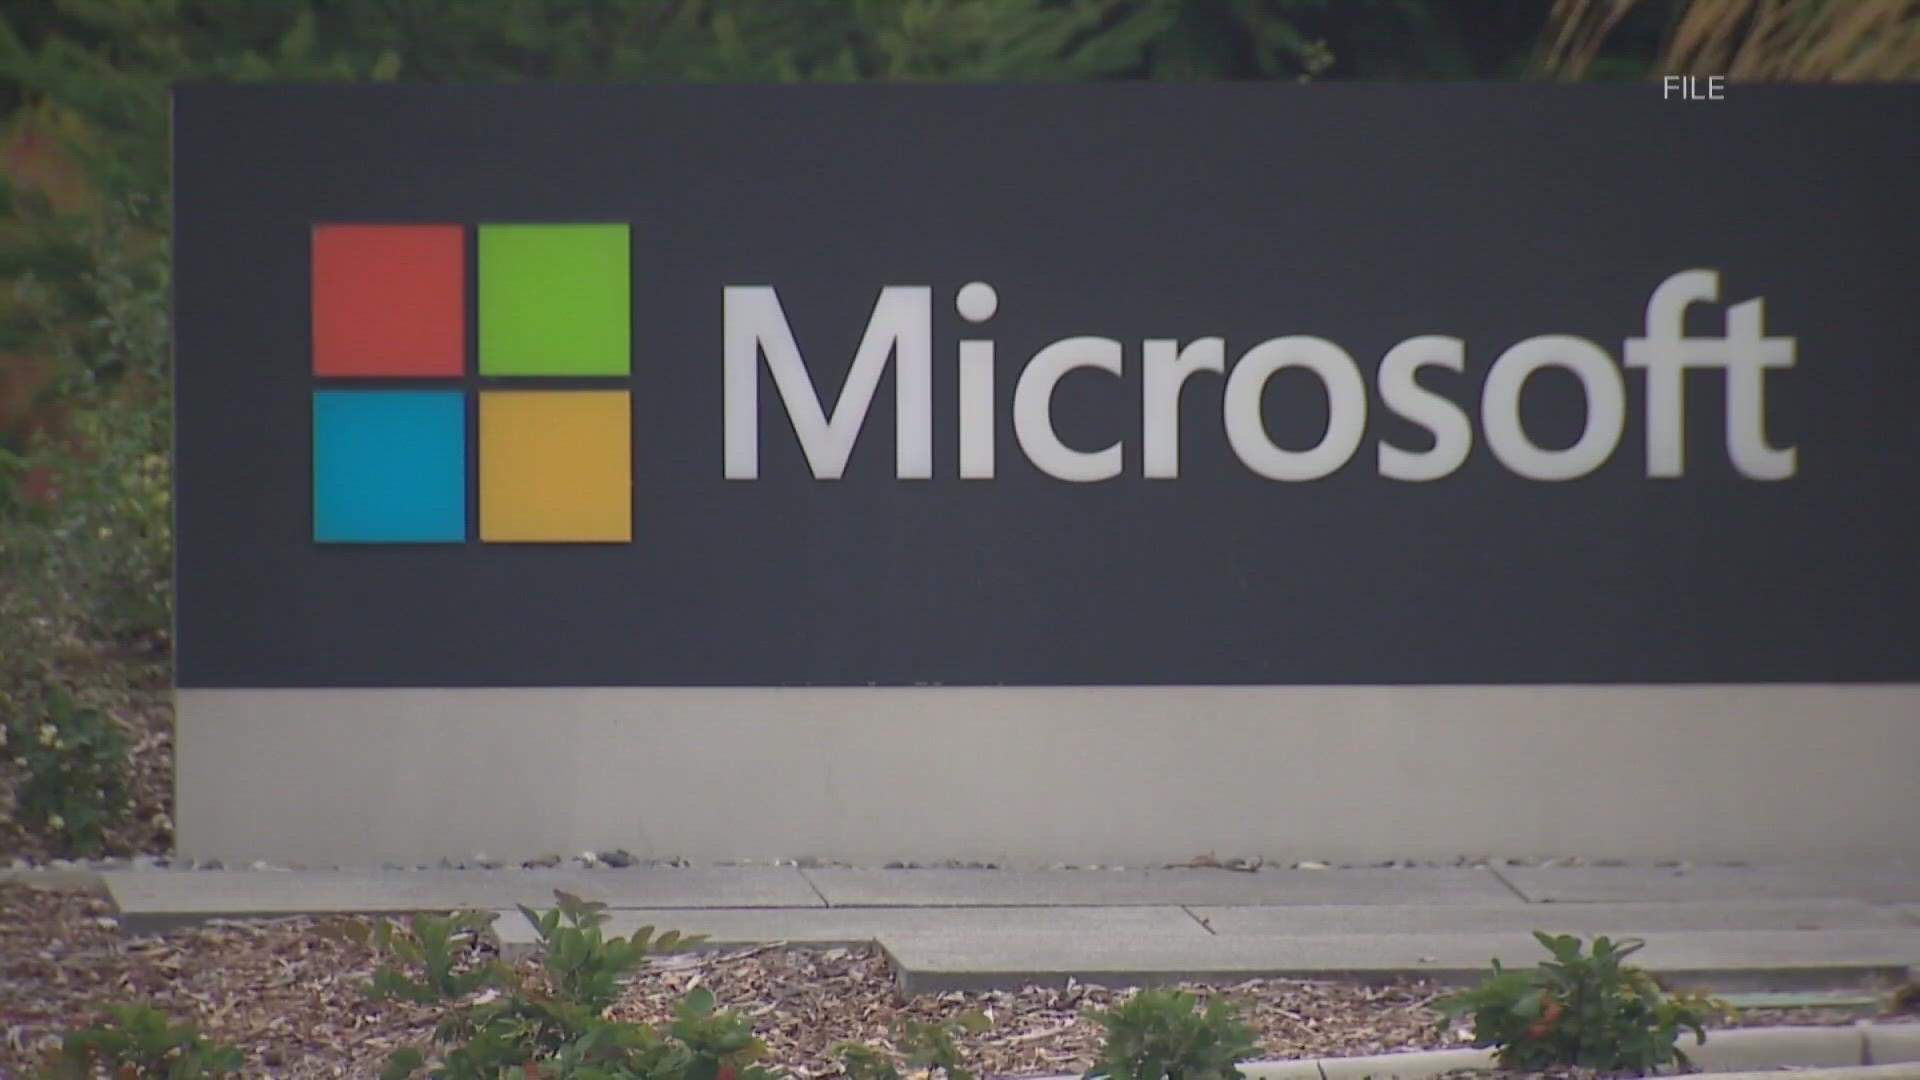 The layoffs will impact 617 Microsoft employees in Redmond, Bellevue and Issaquah, according to the Worker Adjustment and Retraining Notification.